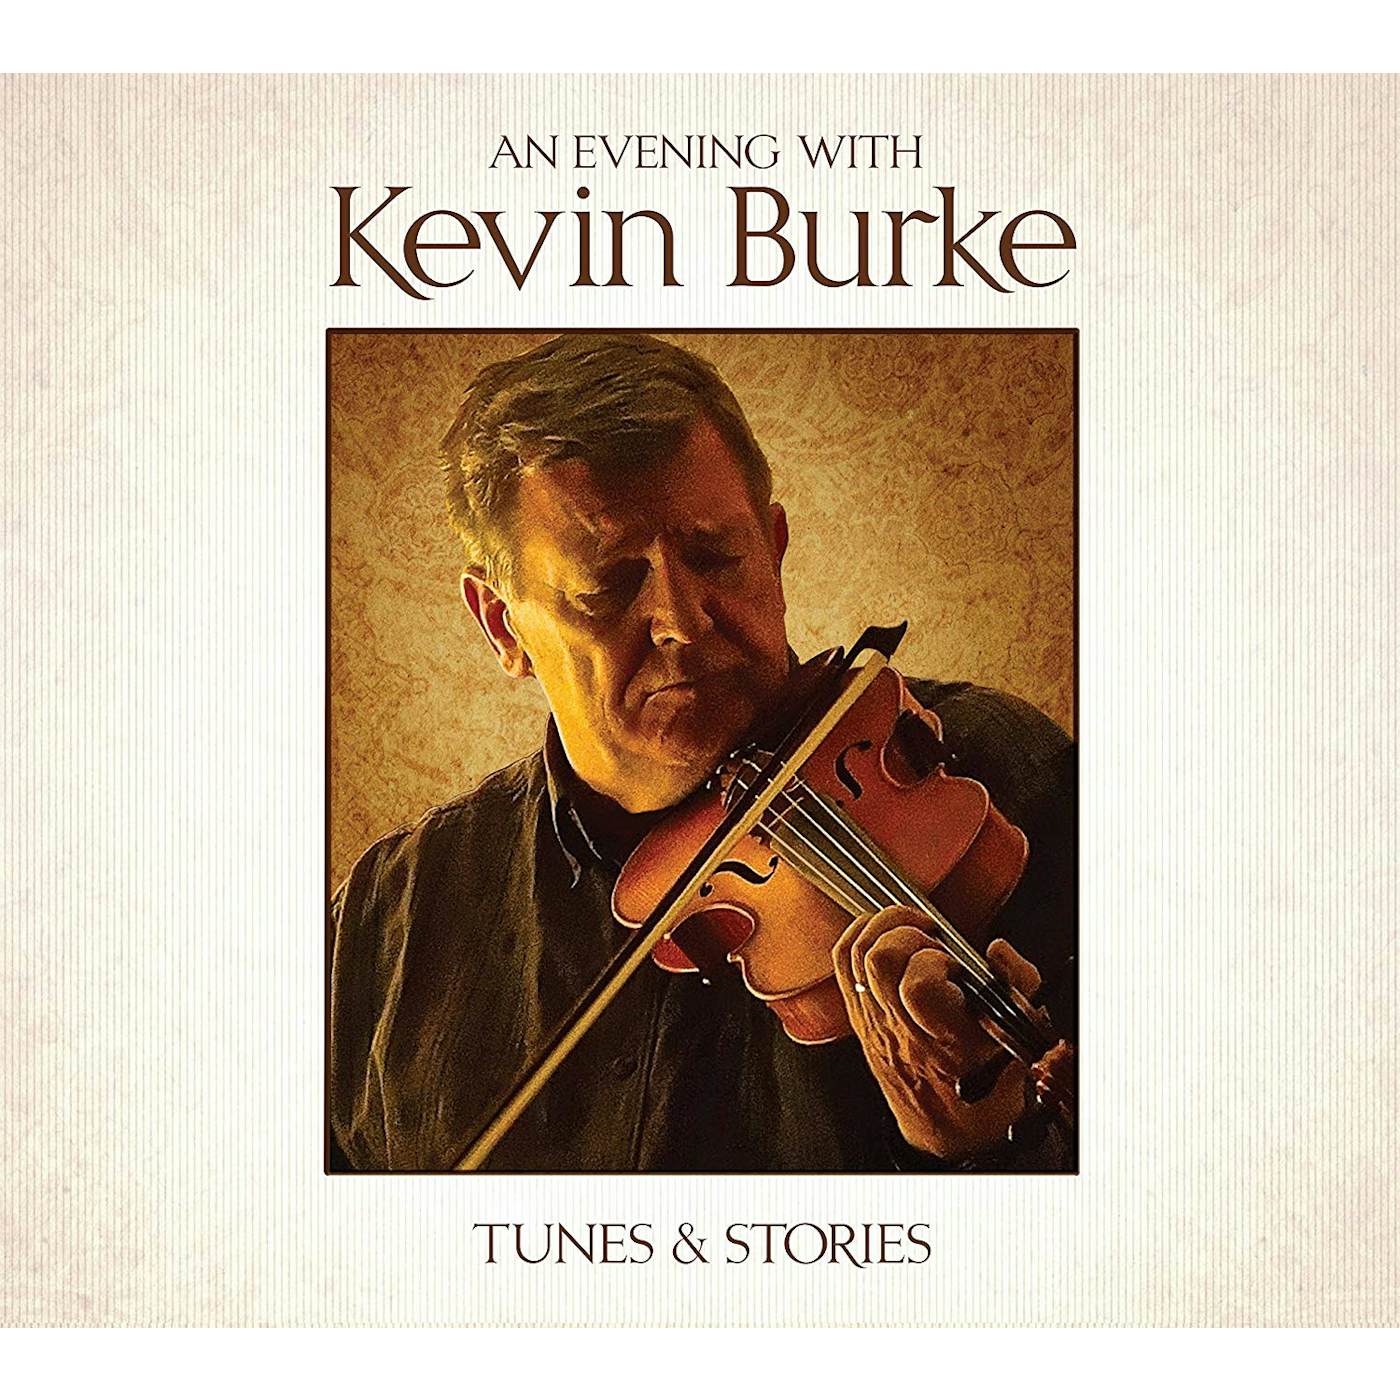 AN EVENING WITH KEVIN BURKE CD